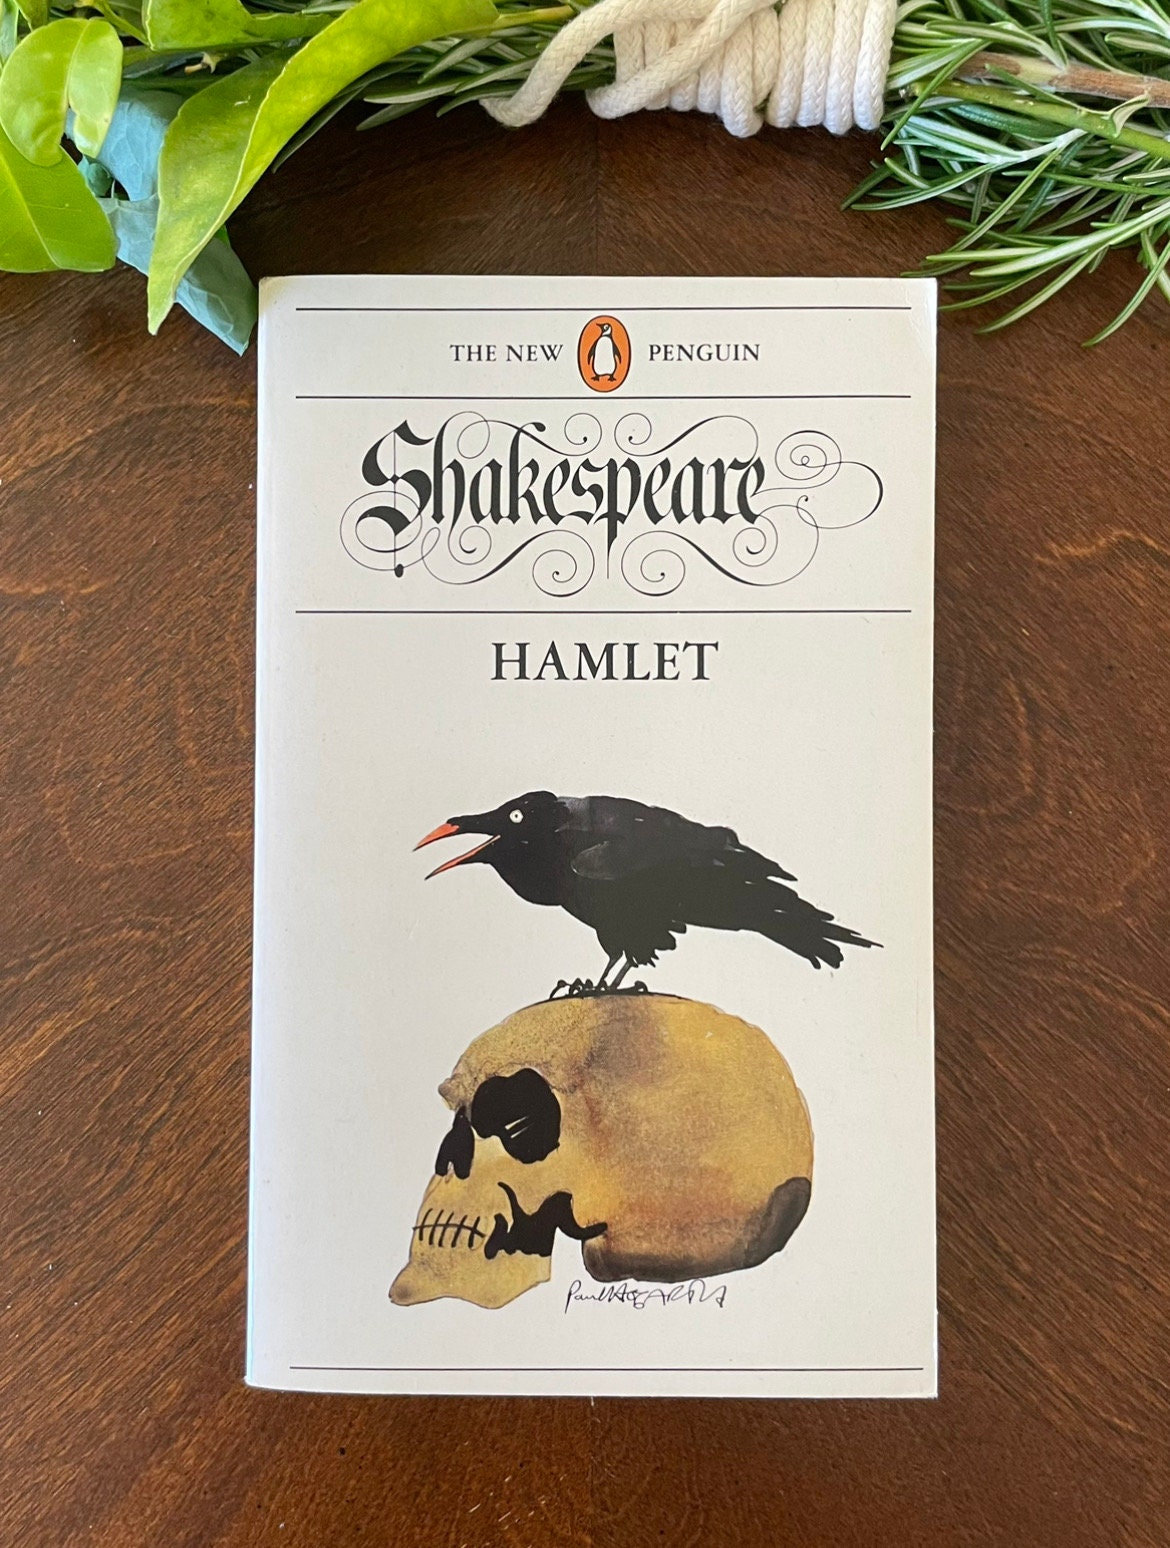 Hamlet | by Shakespeare, 1987, The New Penguin | Classic fiction  literature, plays and poems, vintage paperback book